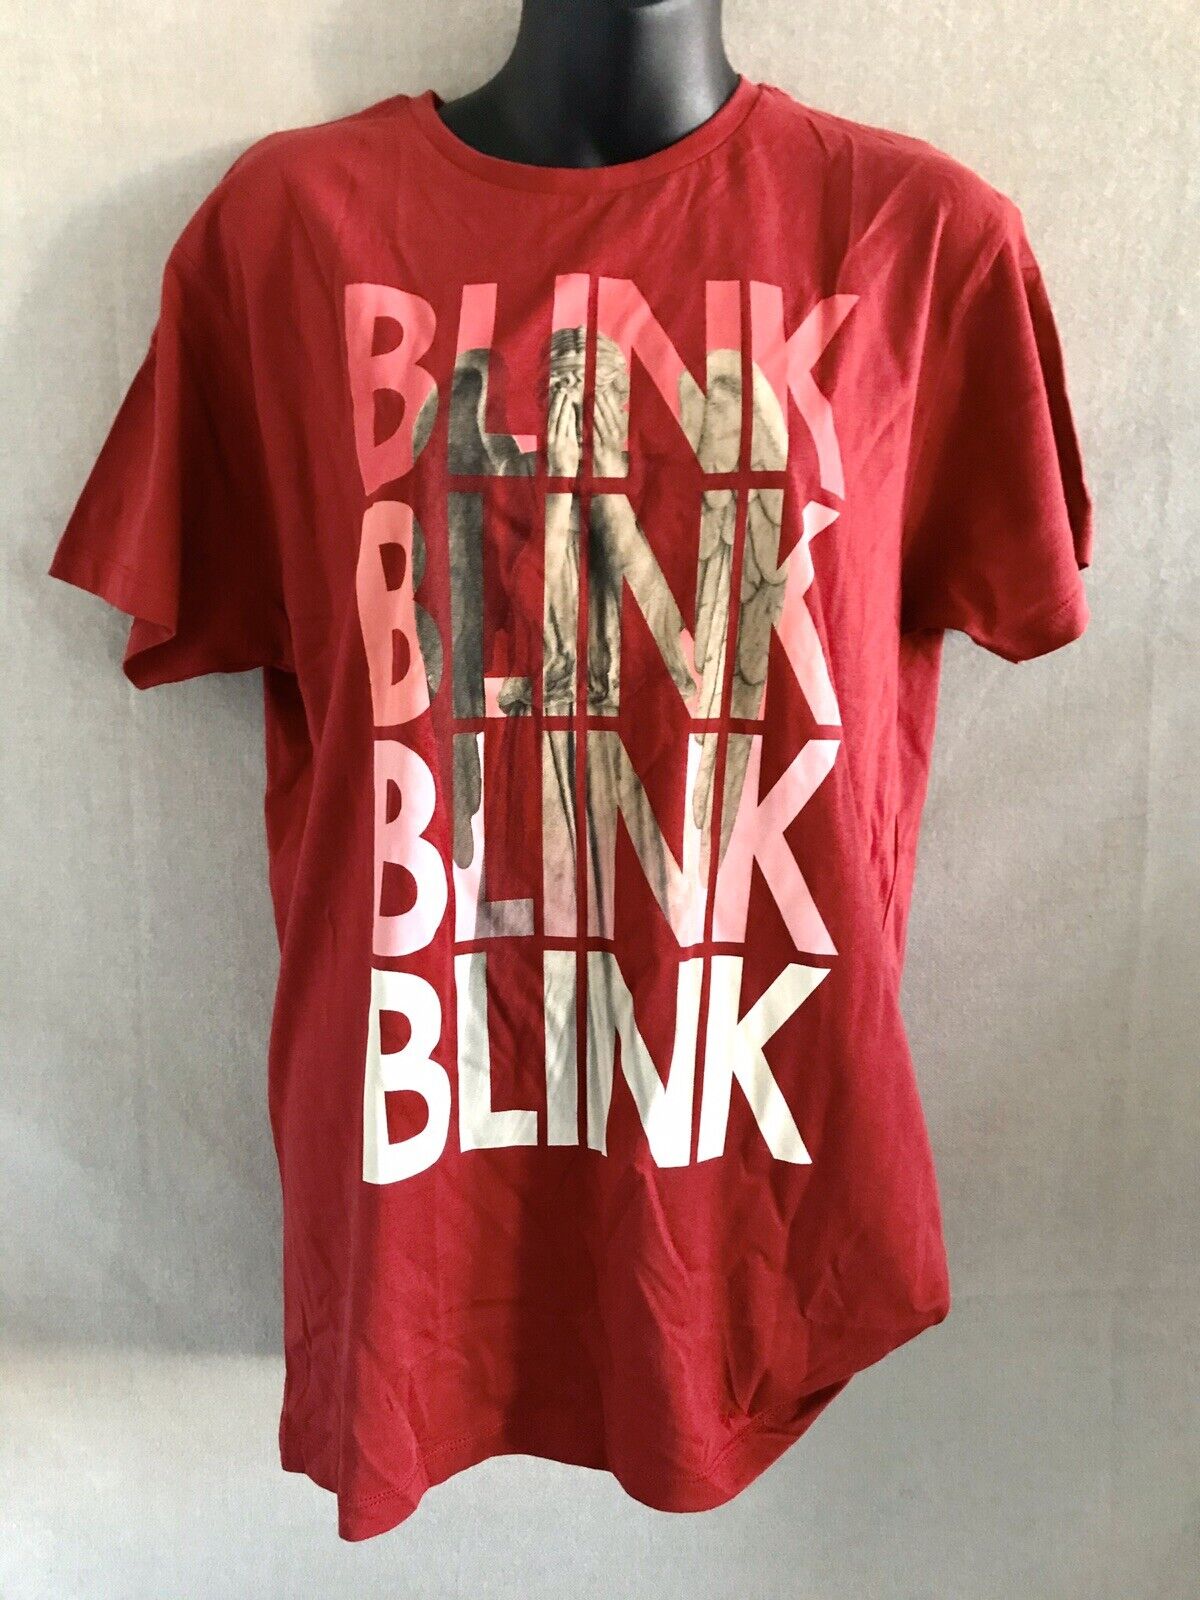 Doctor Who Weeping Angel Blink T-Shirt - Size M - Official BBC Licensed